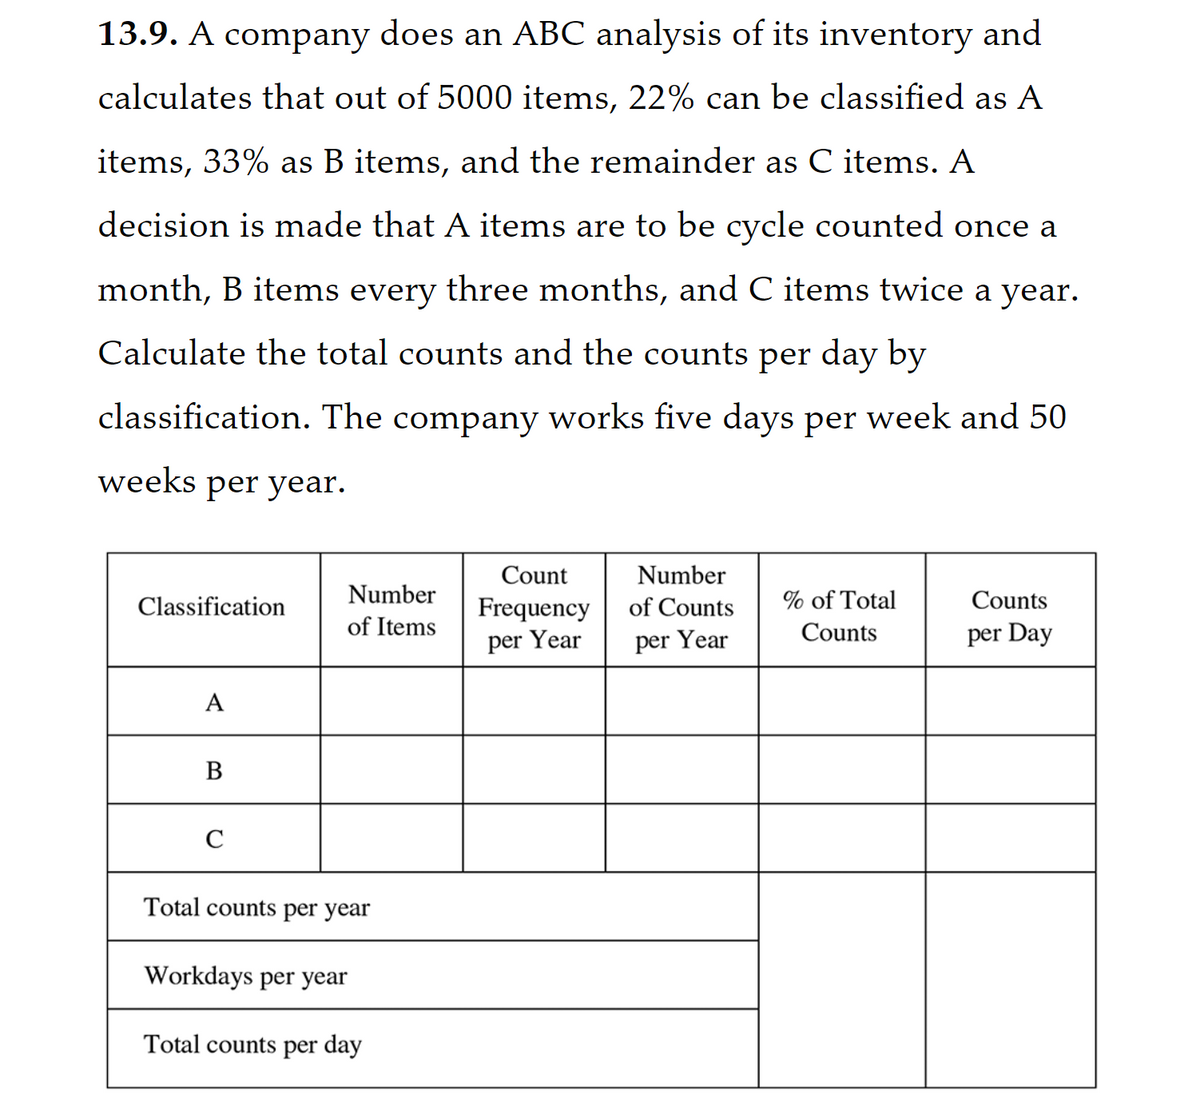 13.9. A company does an ABC analysis of its inventory and
calculates that out of 5000 items, 22% can be classified as A
items, 33% as B items, and the remainder as C items. A
decision is made that A items are to be cycle counted once a
month, B items every three months, and C items twice a year.
Calculate the total counts and the counts per day by
classification. The company works five days per week and 50
weeks per year.
Classification
A
B
C
Number
of Items
Total counts per year
Workdays per year
Total counts per day
Count
Frequency
per Year
Number
of Counts
per Year
% of Total
Counts
Counts
per Day